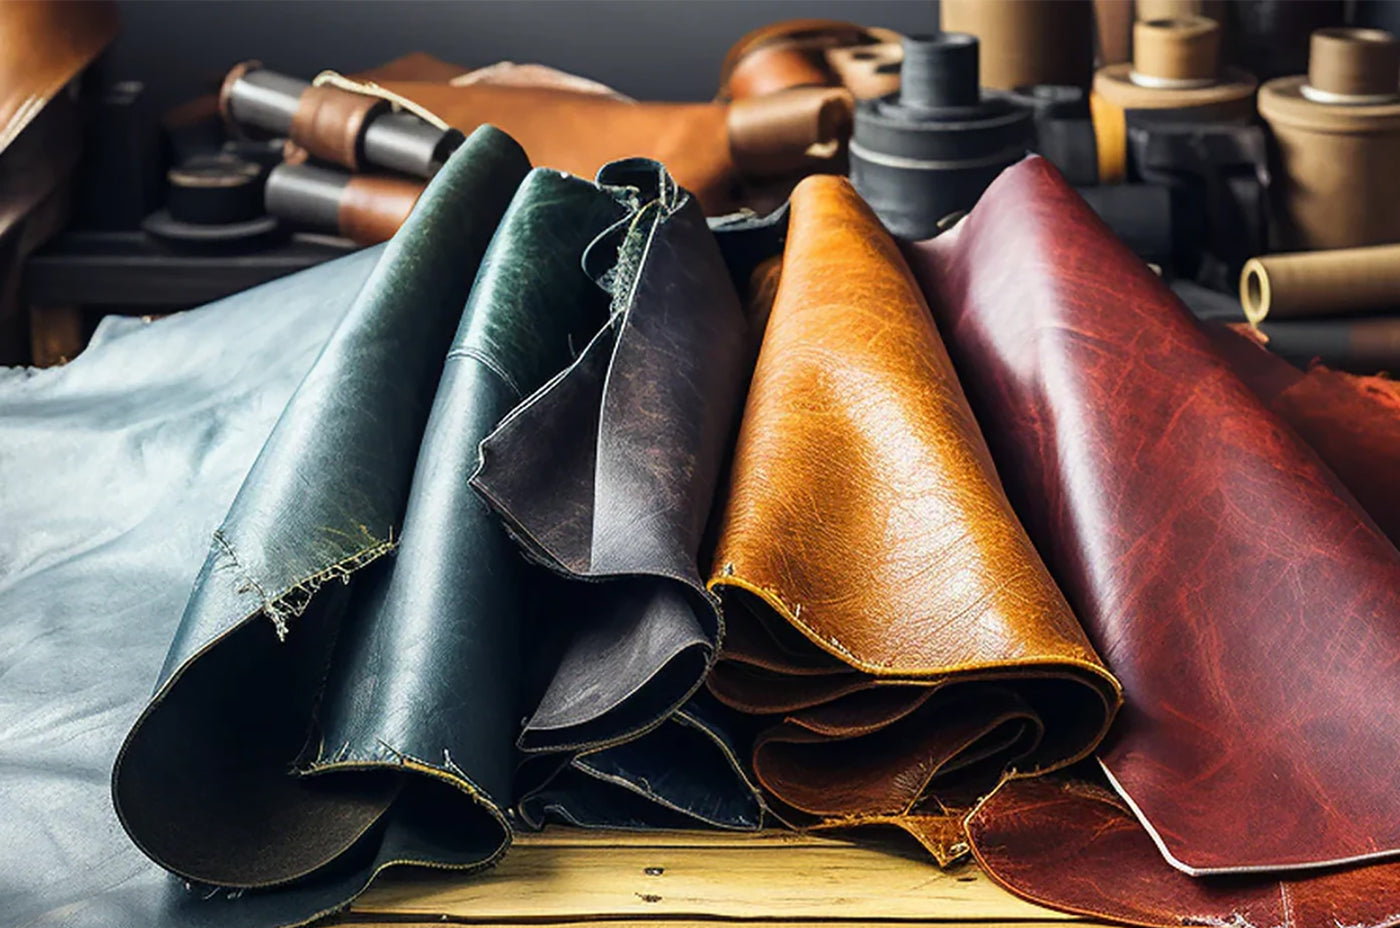 Transparency Unveiled: LUC8K`s Ethical Leather Revolution